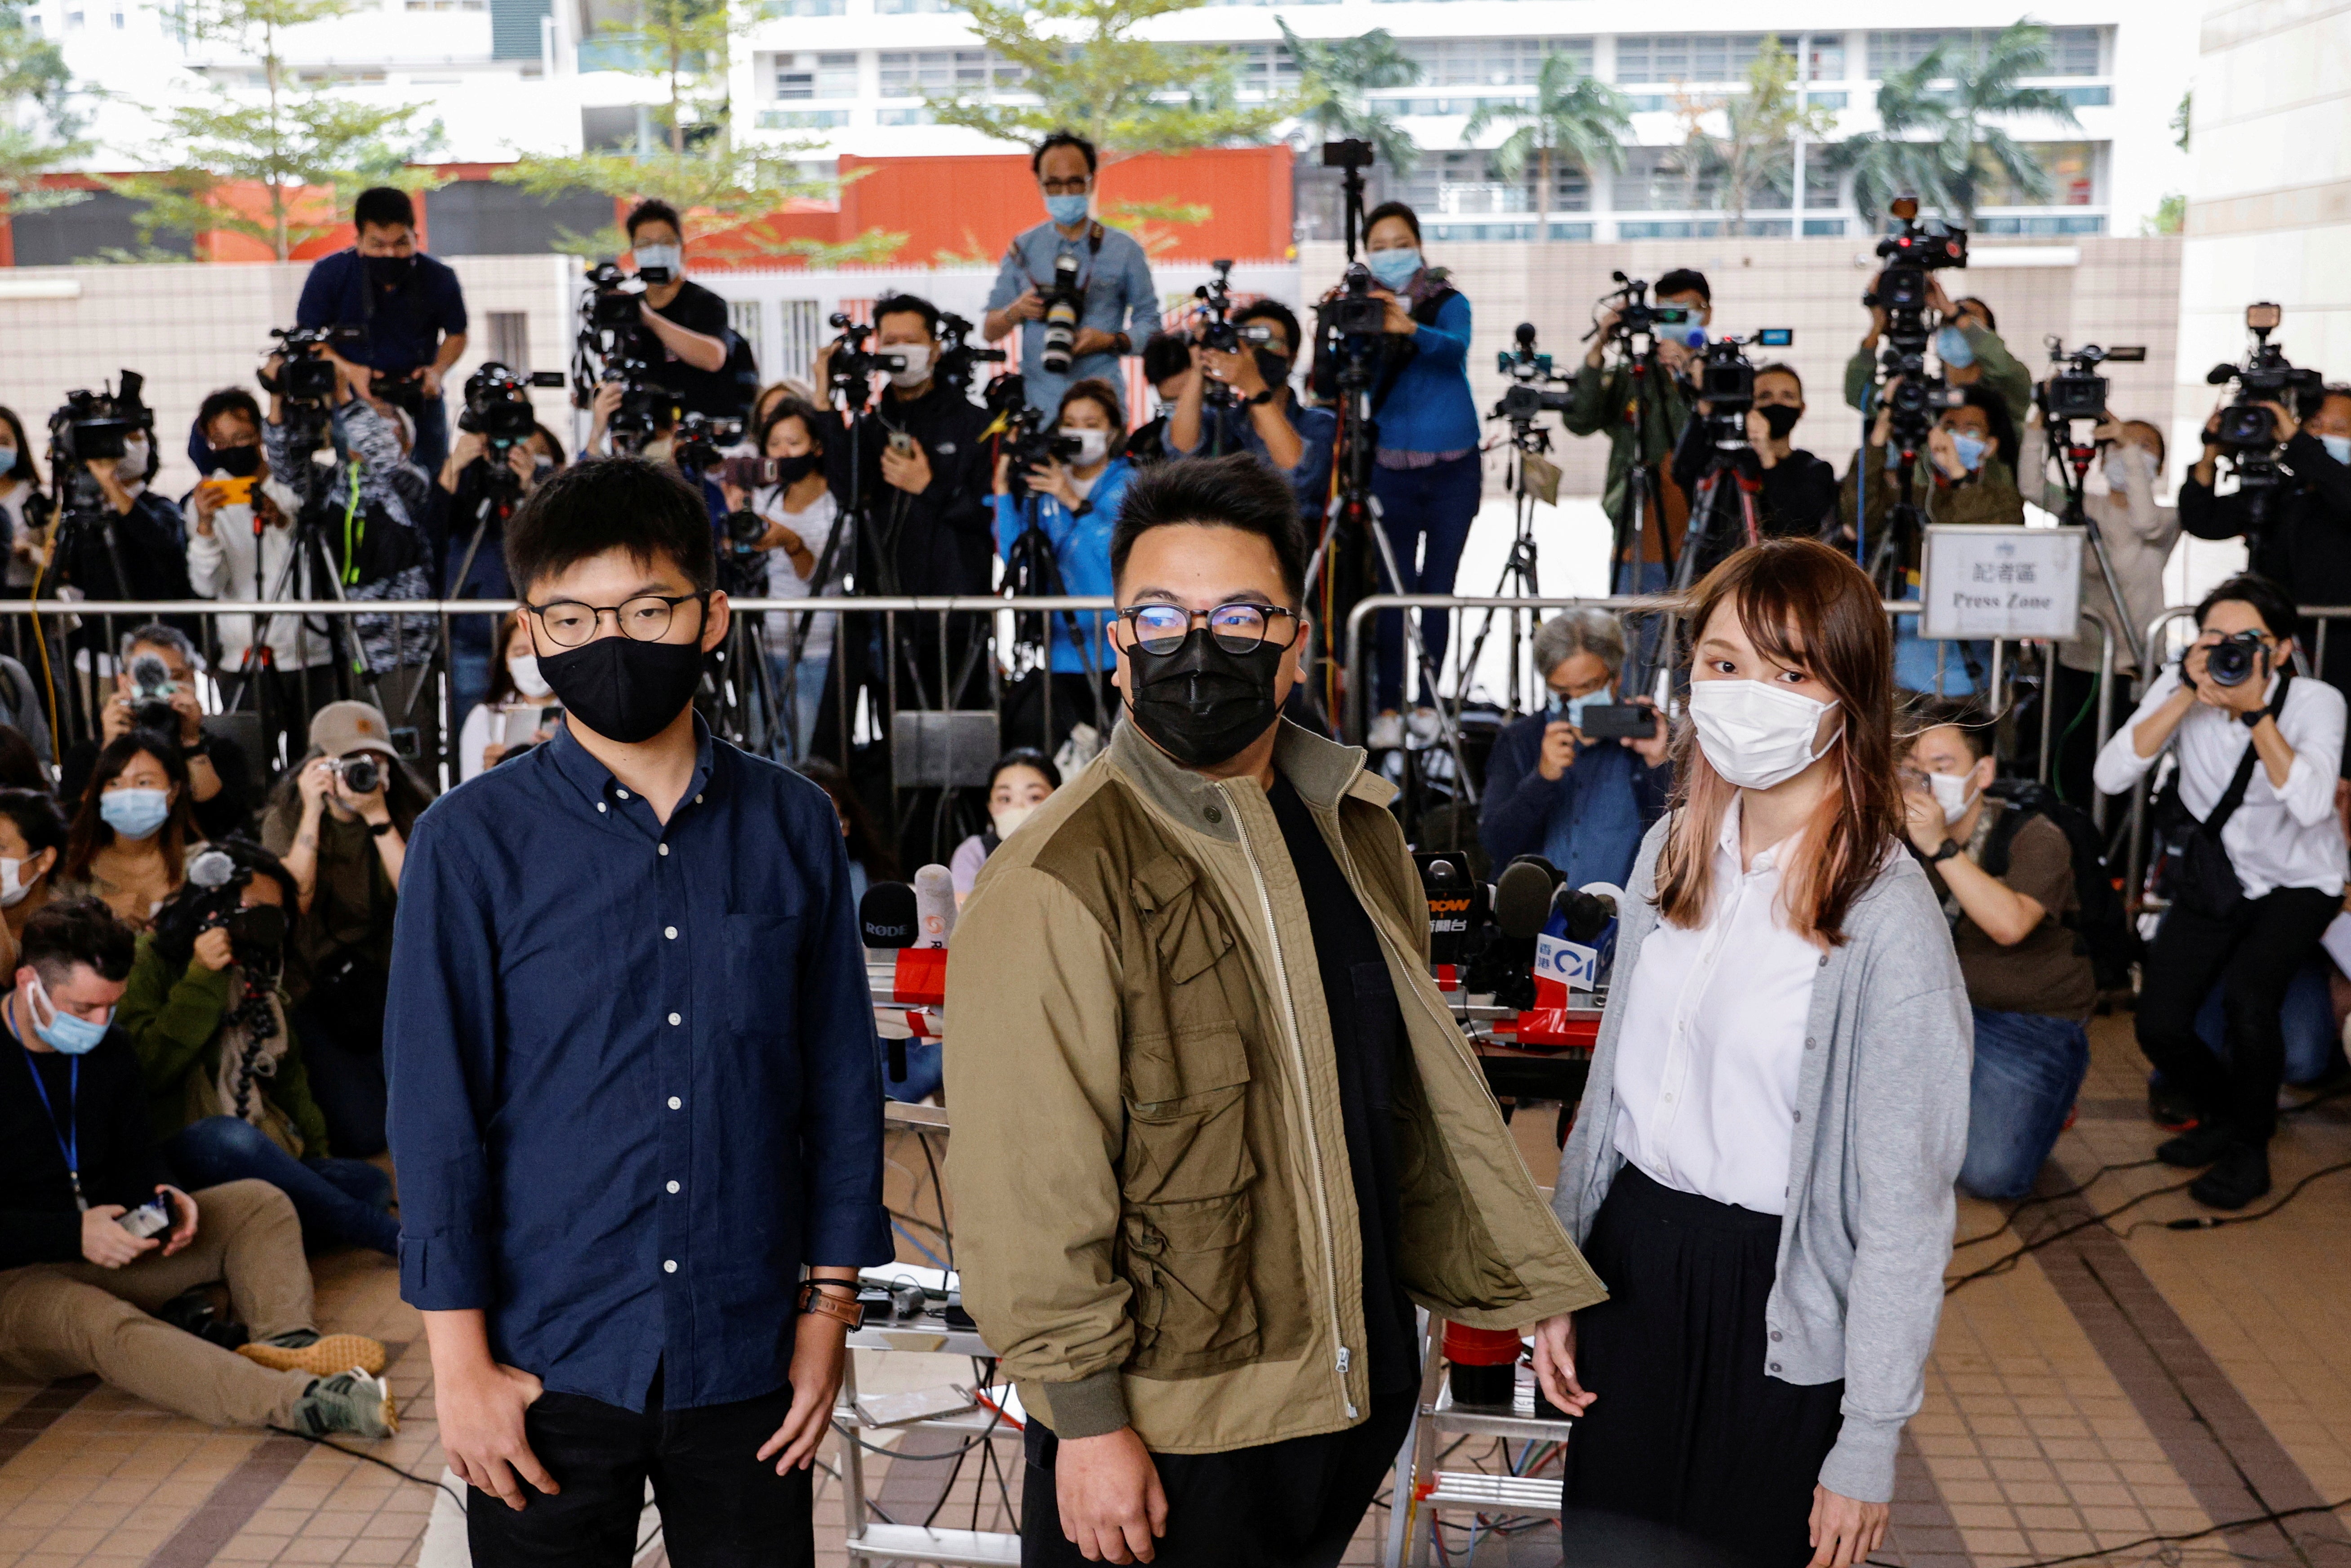 Pro-democracy activists Ivan Lam, Joshua Wong and Agnes Chow are some of those who have faced up against Hong Kong authorities